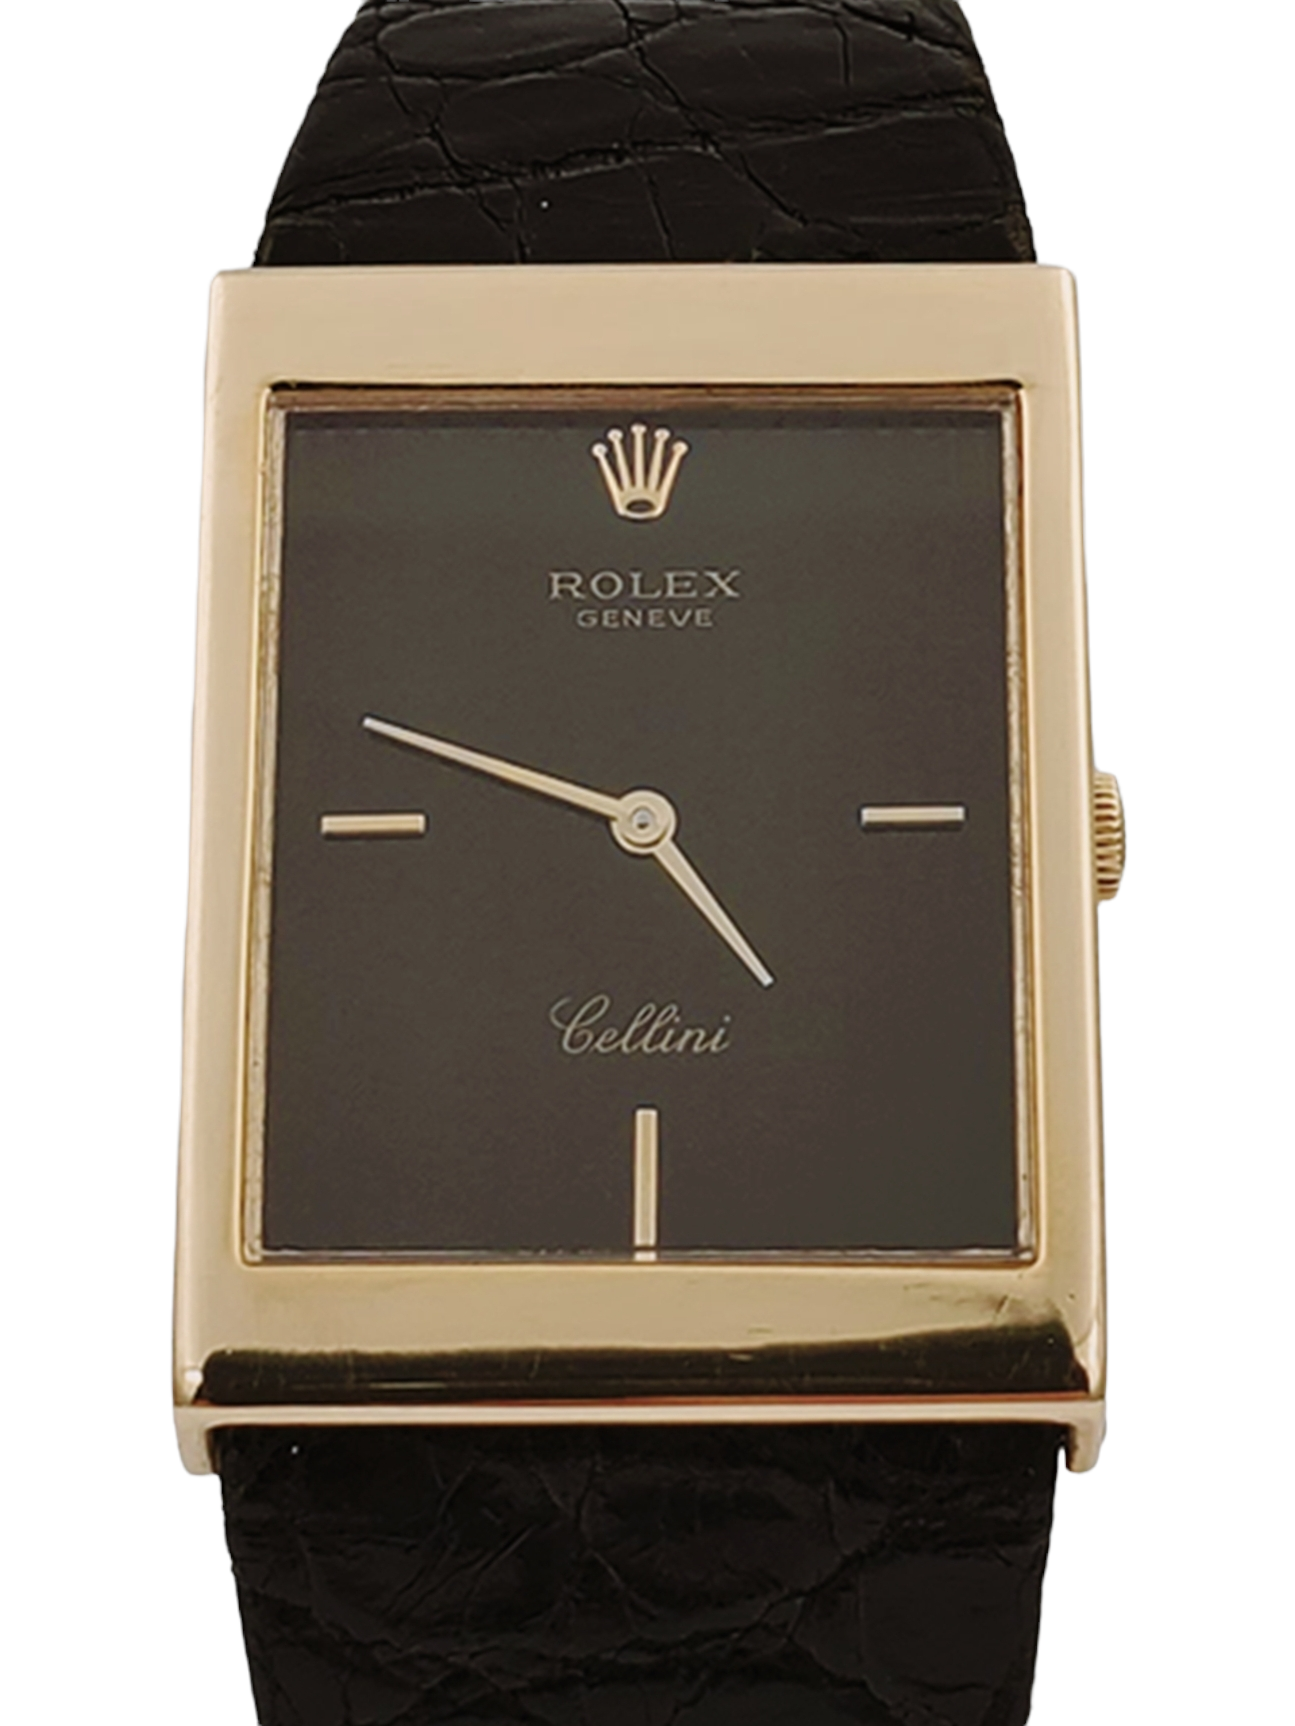 Men's Rolex Cellini Vintage 18K Yellow Gold Watch with Black Tapestry Dial and Black Leather Strap.